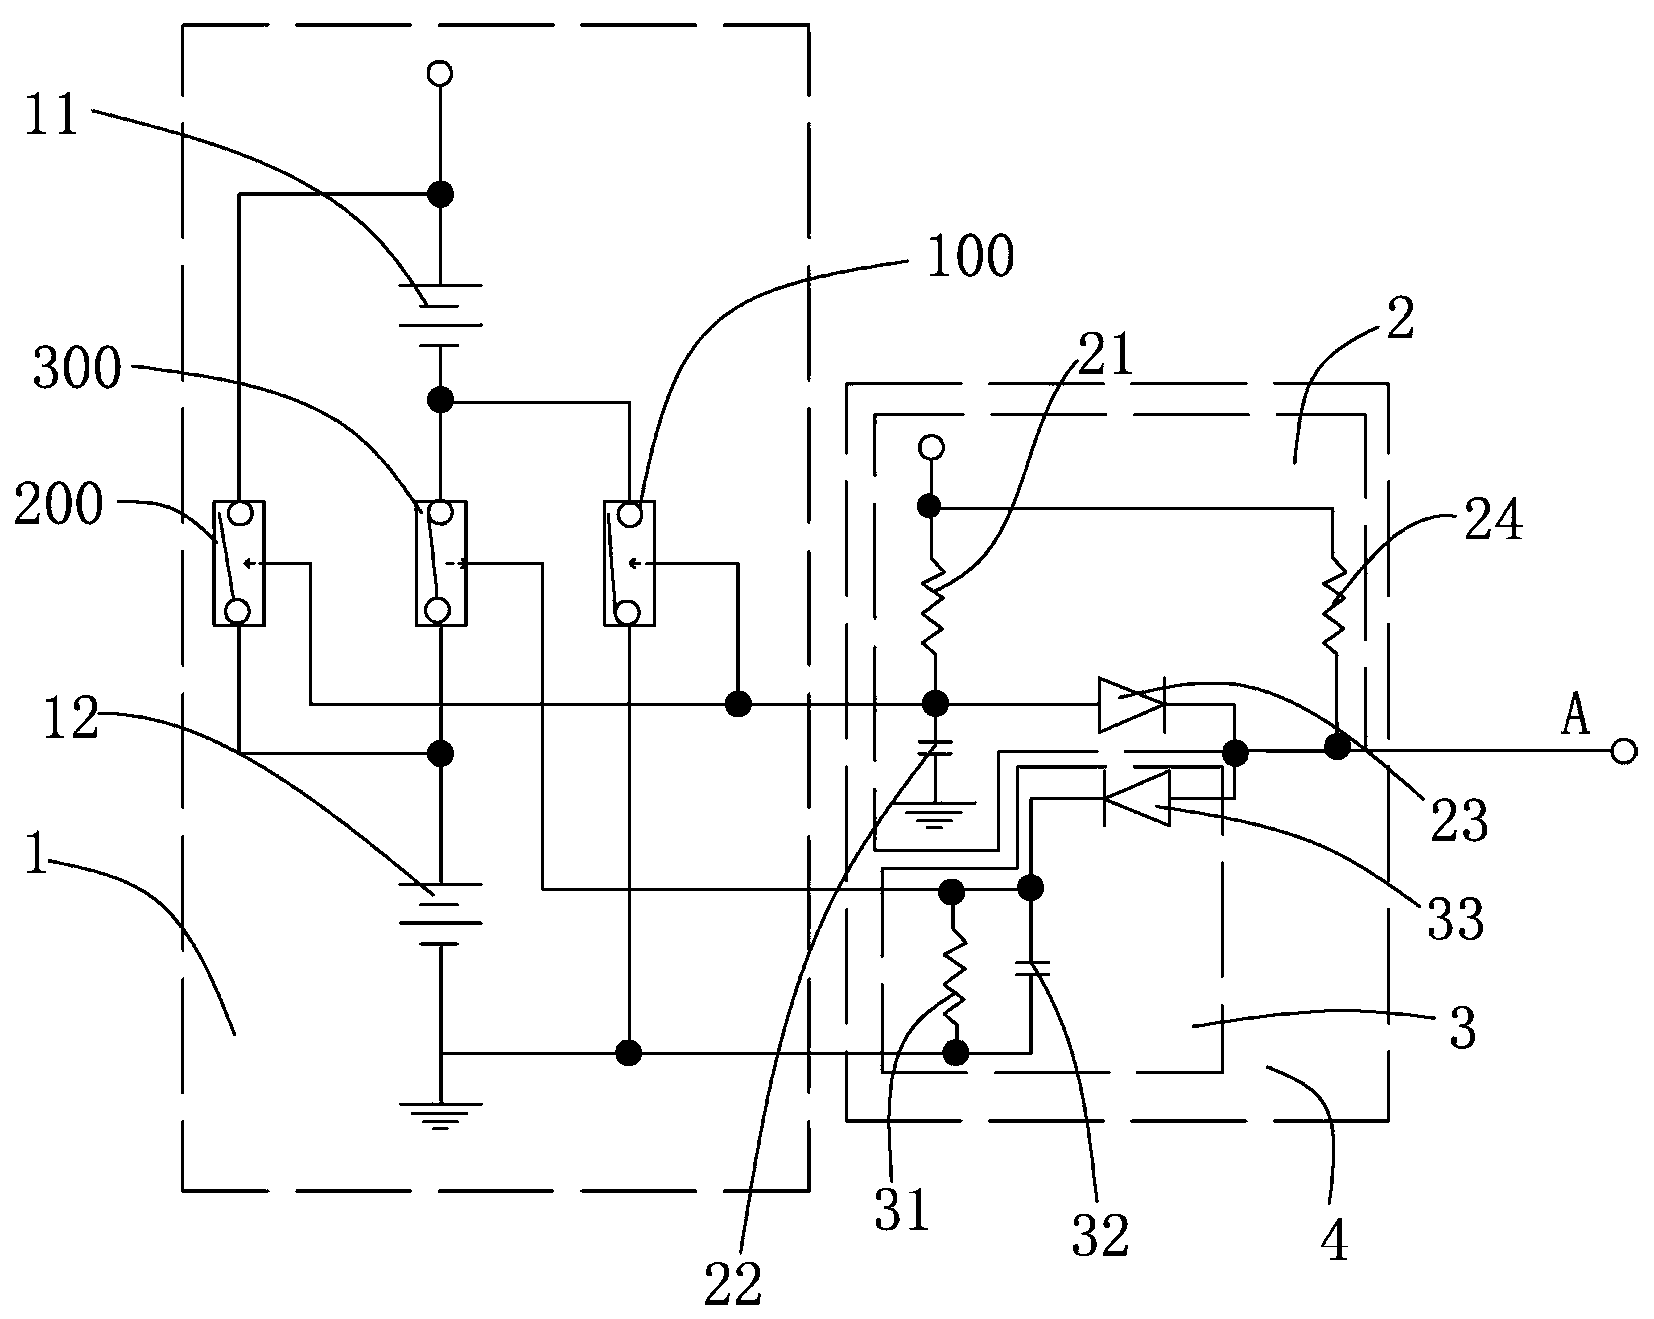 Logic timing control circuit and parallel charging and serial discharging control circuit